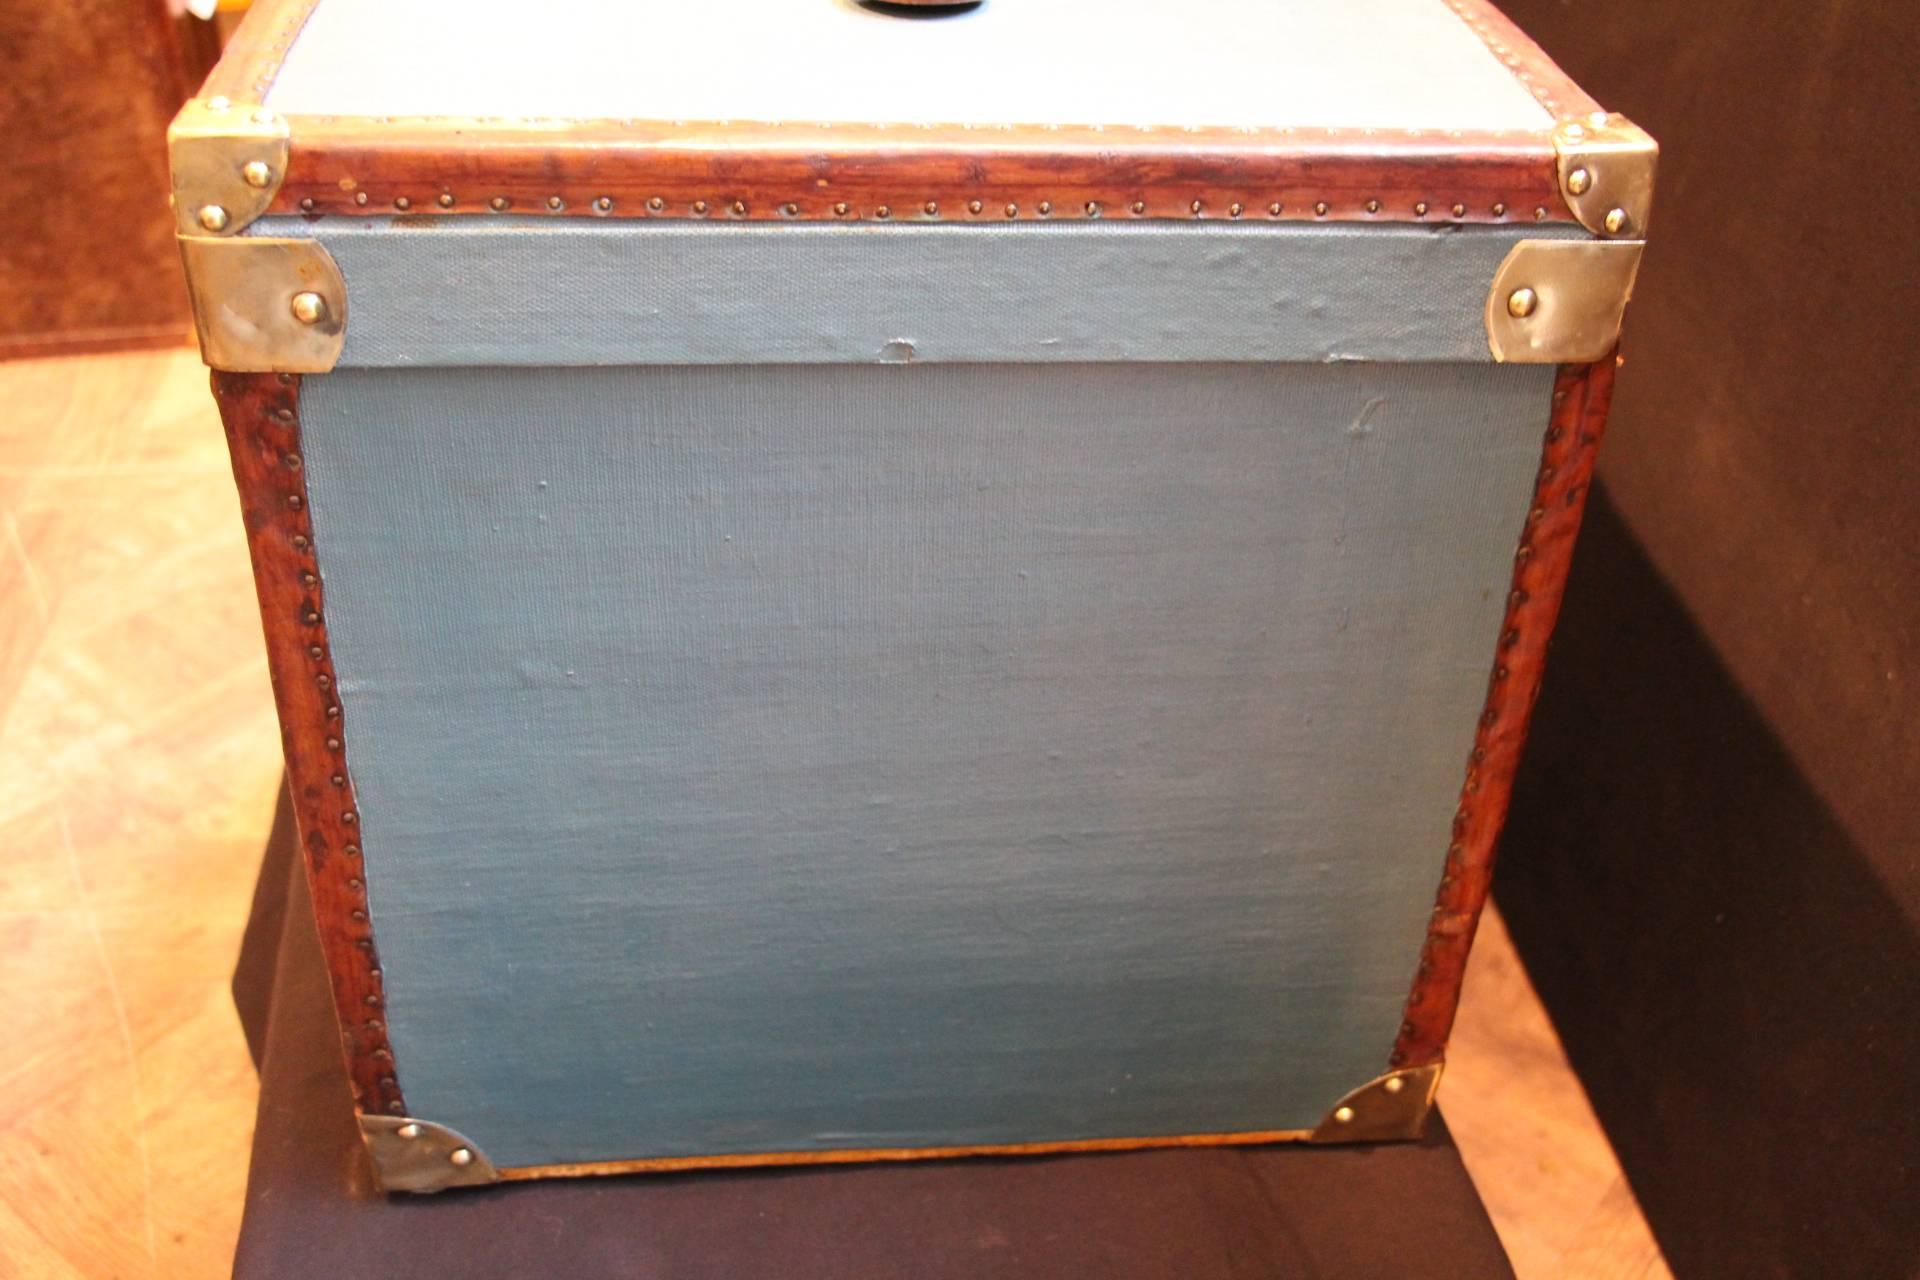 Very nice blue hat box featuring leather trim, brass clasps and corners, leather handle on the top.
Original fresh and clean beige lining interior with its original maker's tag